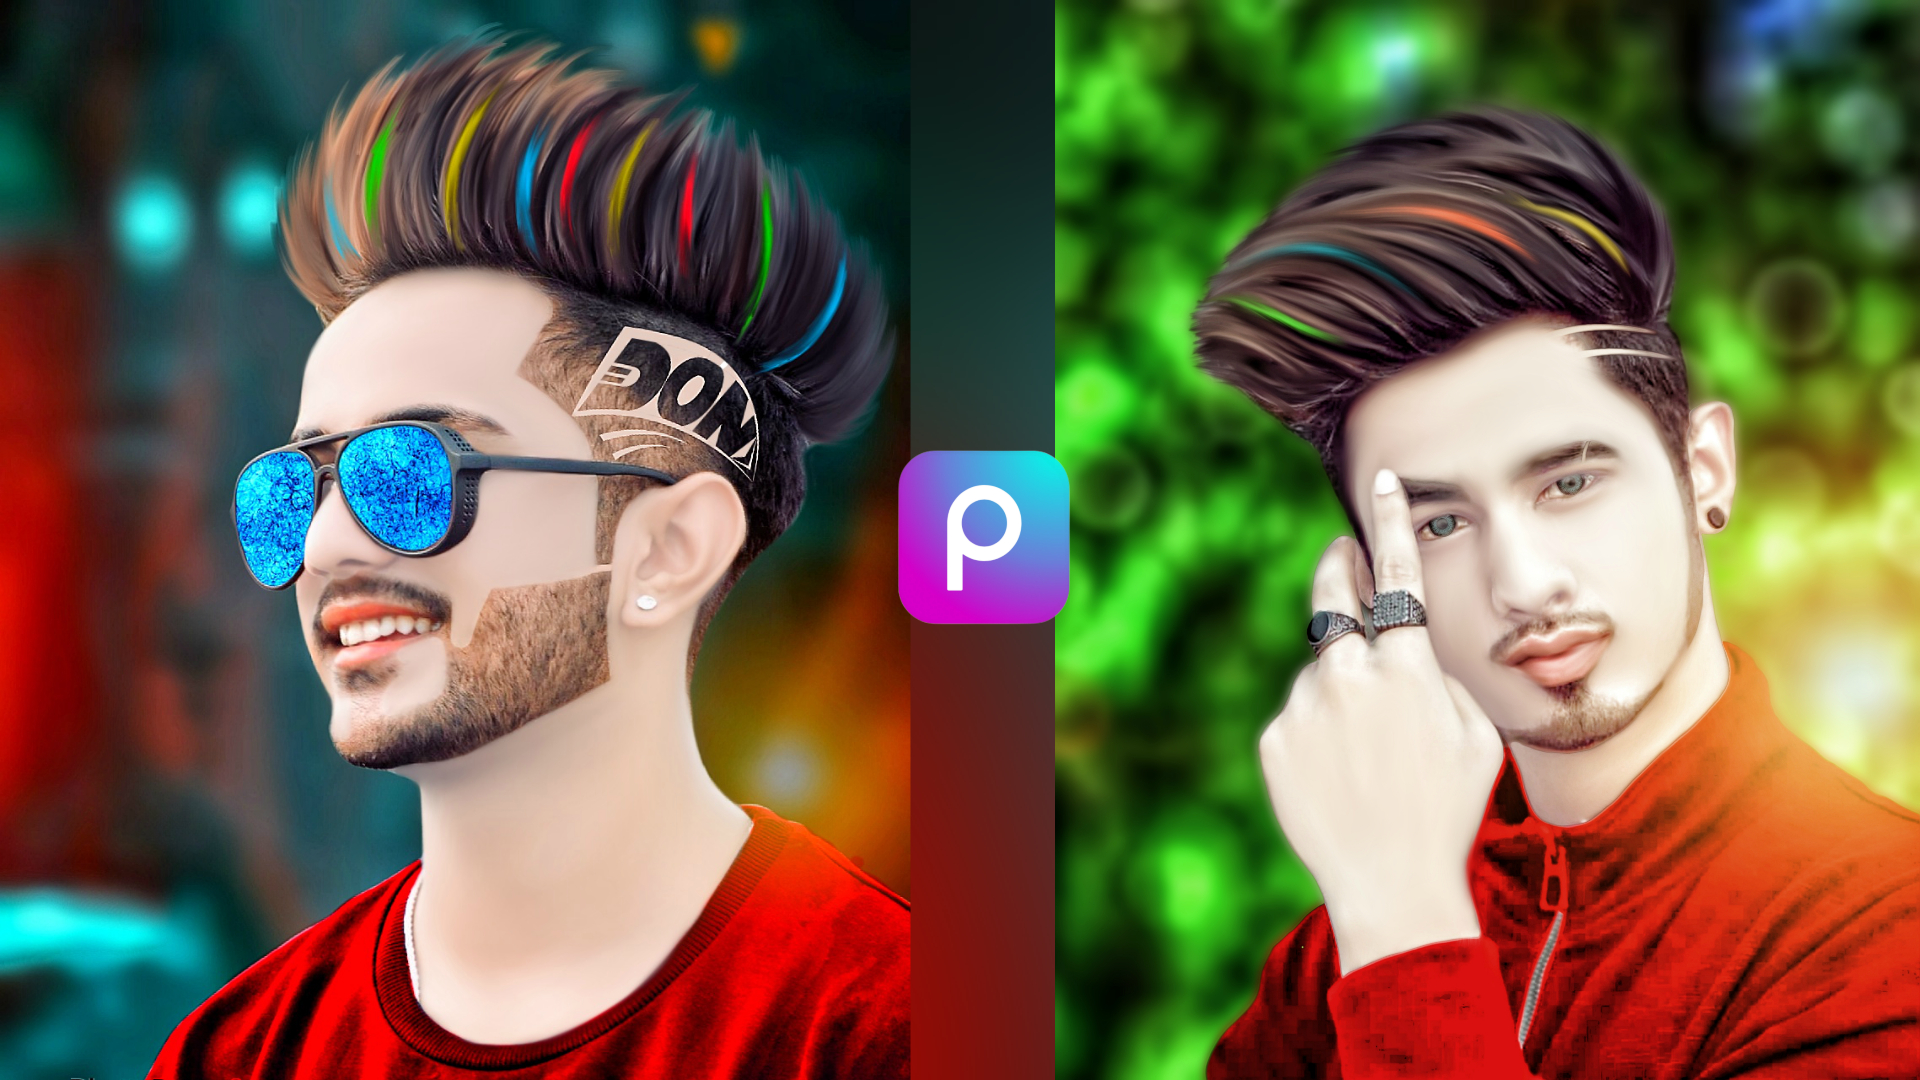 CB background and Cb hair png download - DJ PHOTO EDITING